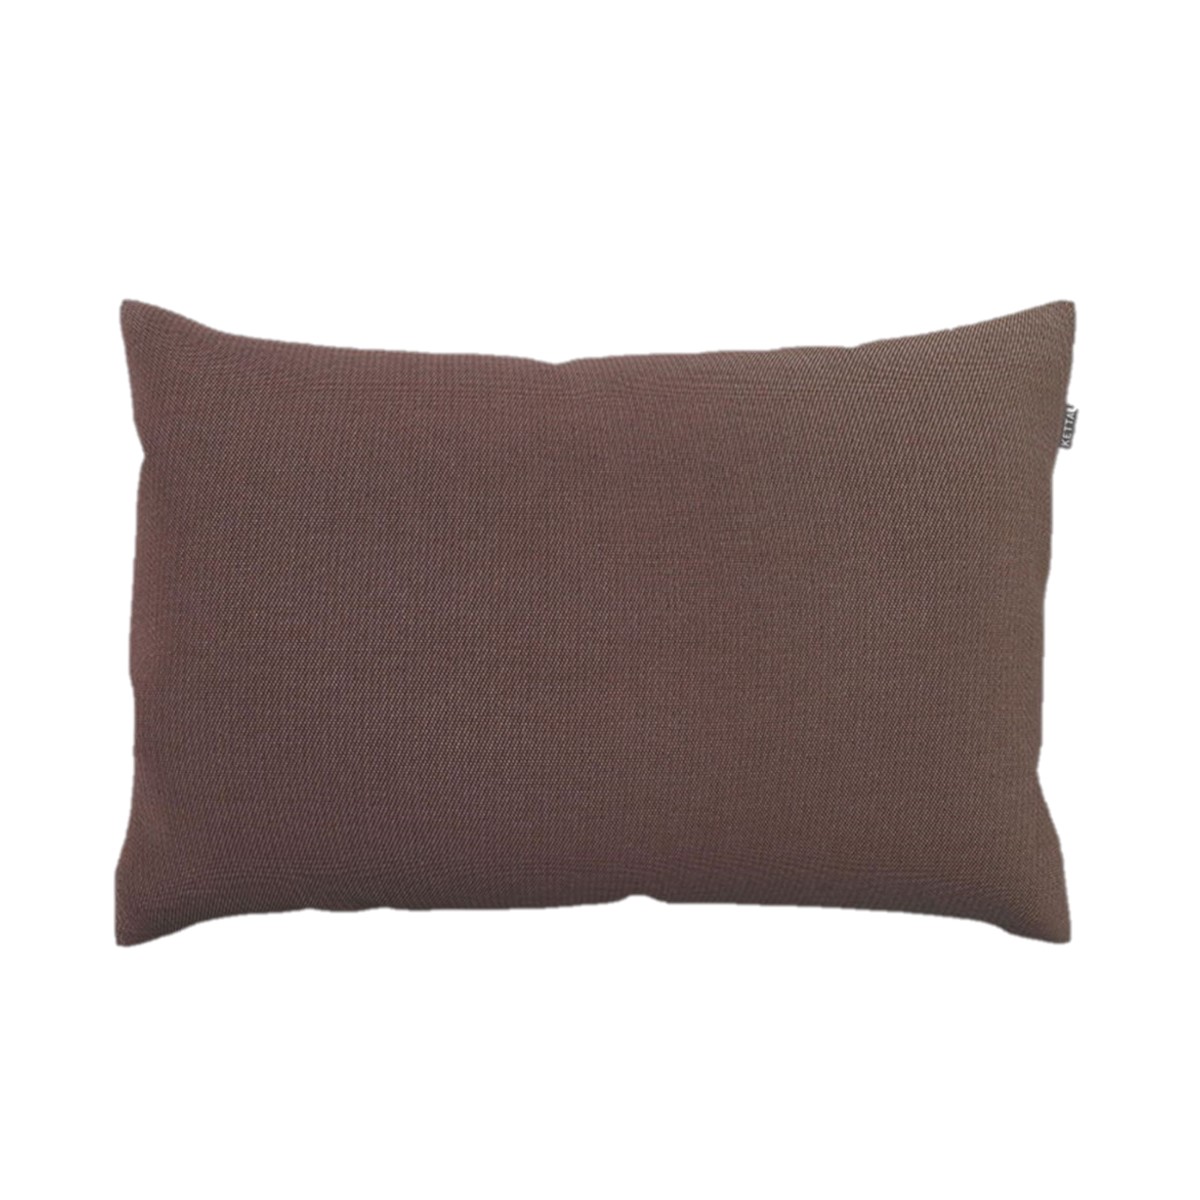 Product Image Objects Cushions 62x38